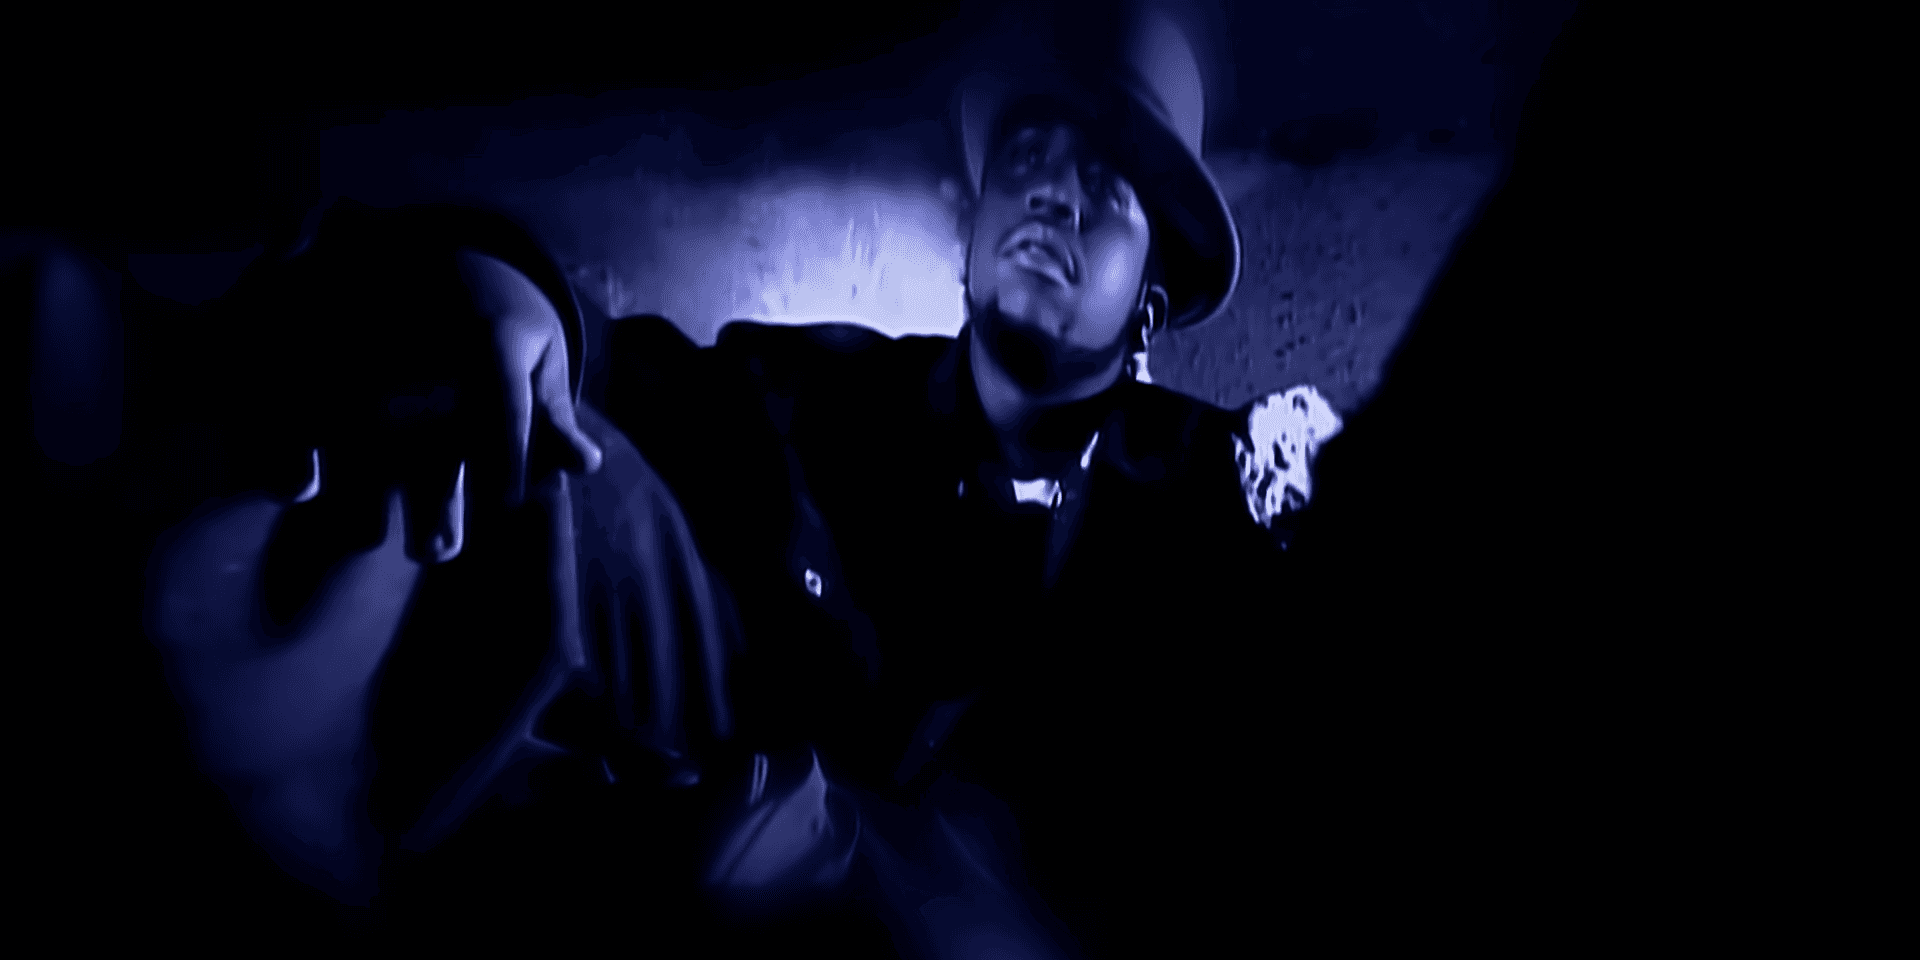 Big Boi is wearing a bowling hat while sitting wide leg on the floor against blue hue lighting.